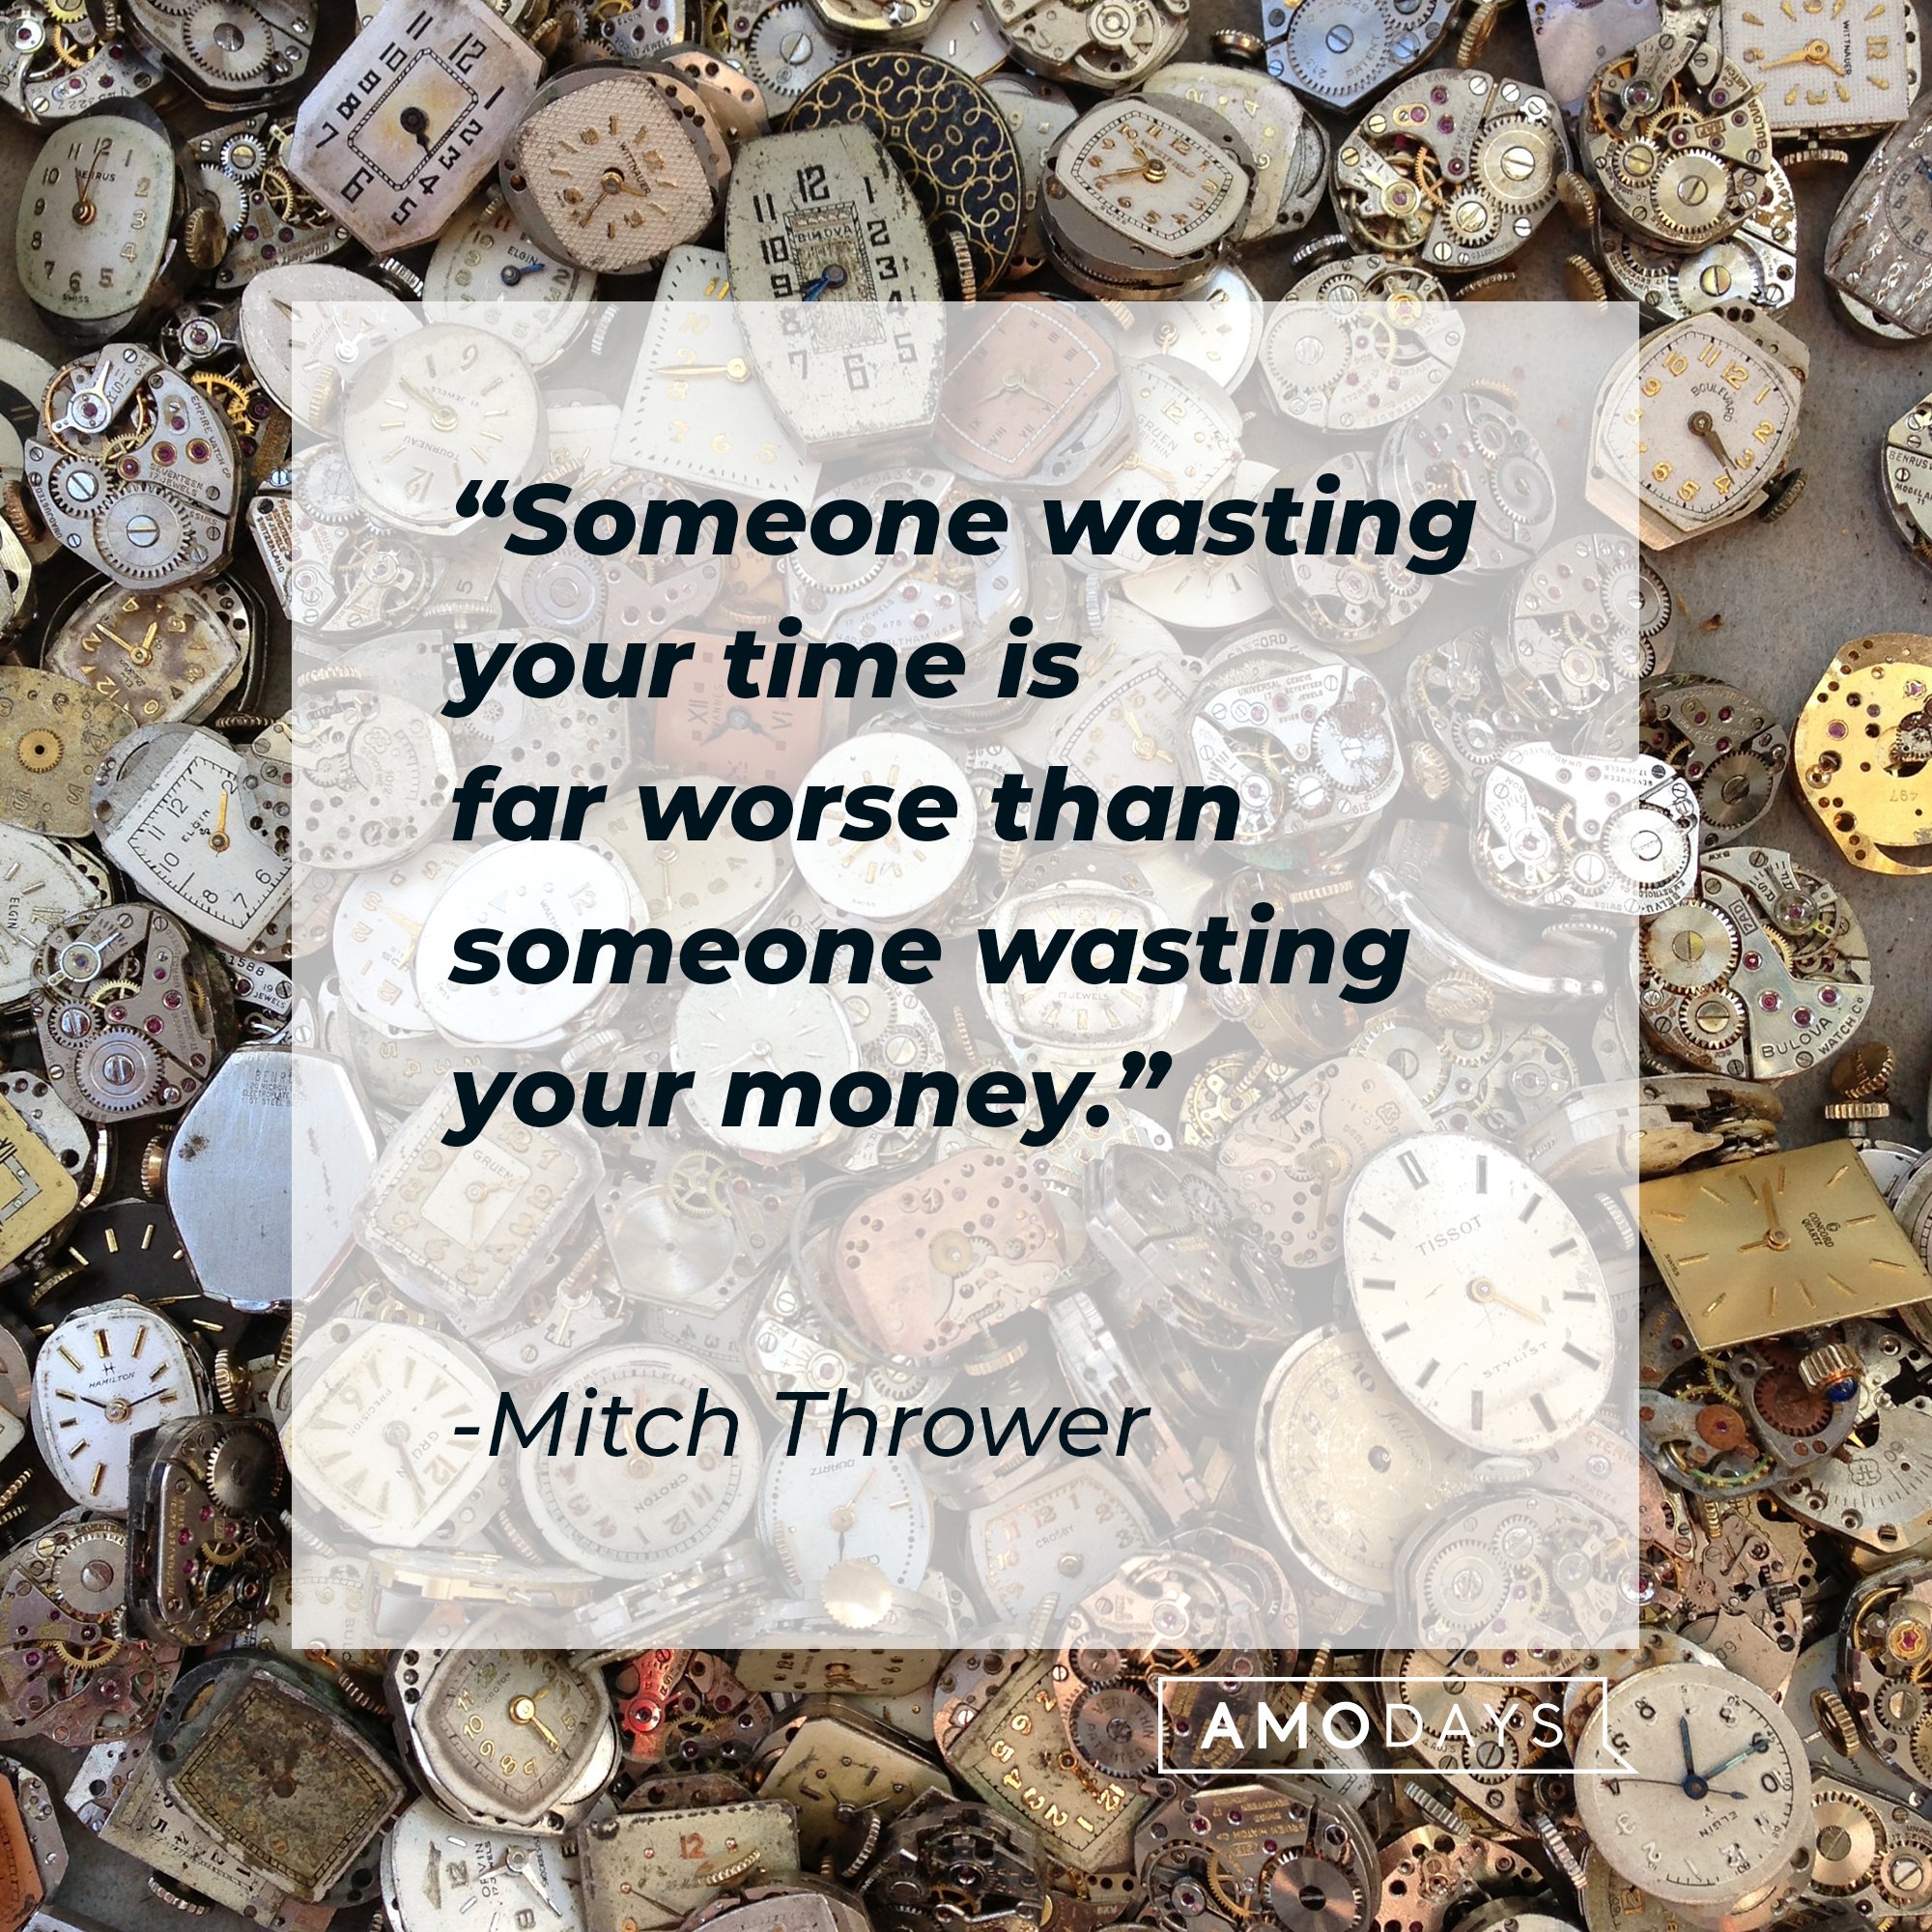 Mitch Thrower’s quote: “Someone wasting your time is far worse than someone wasting your money.” | Image: AmoDays   